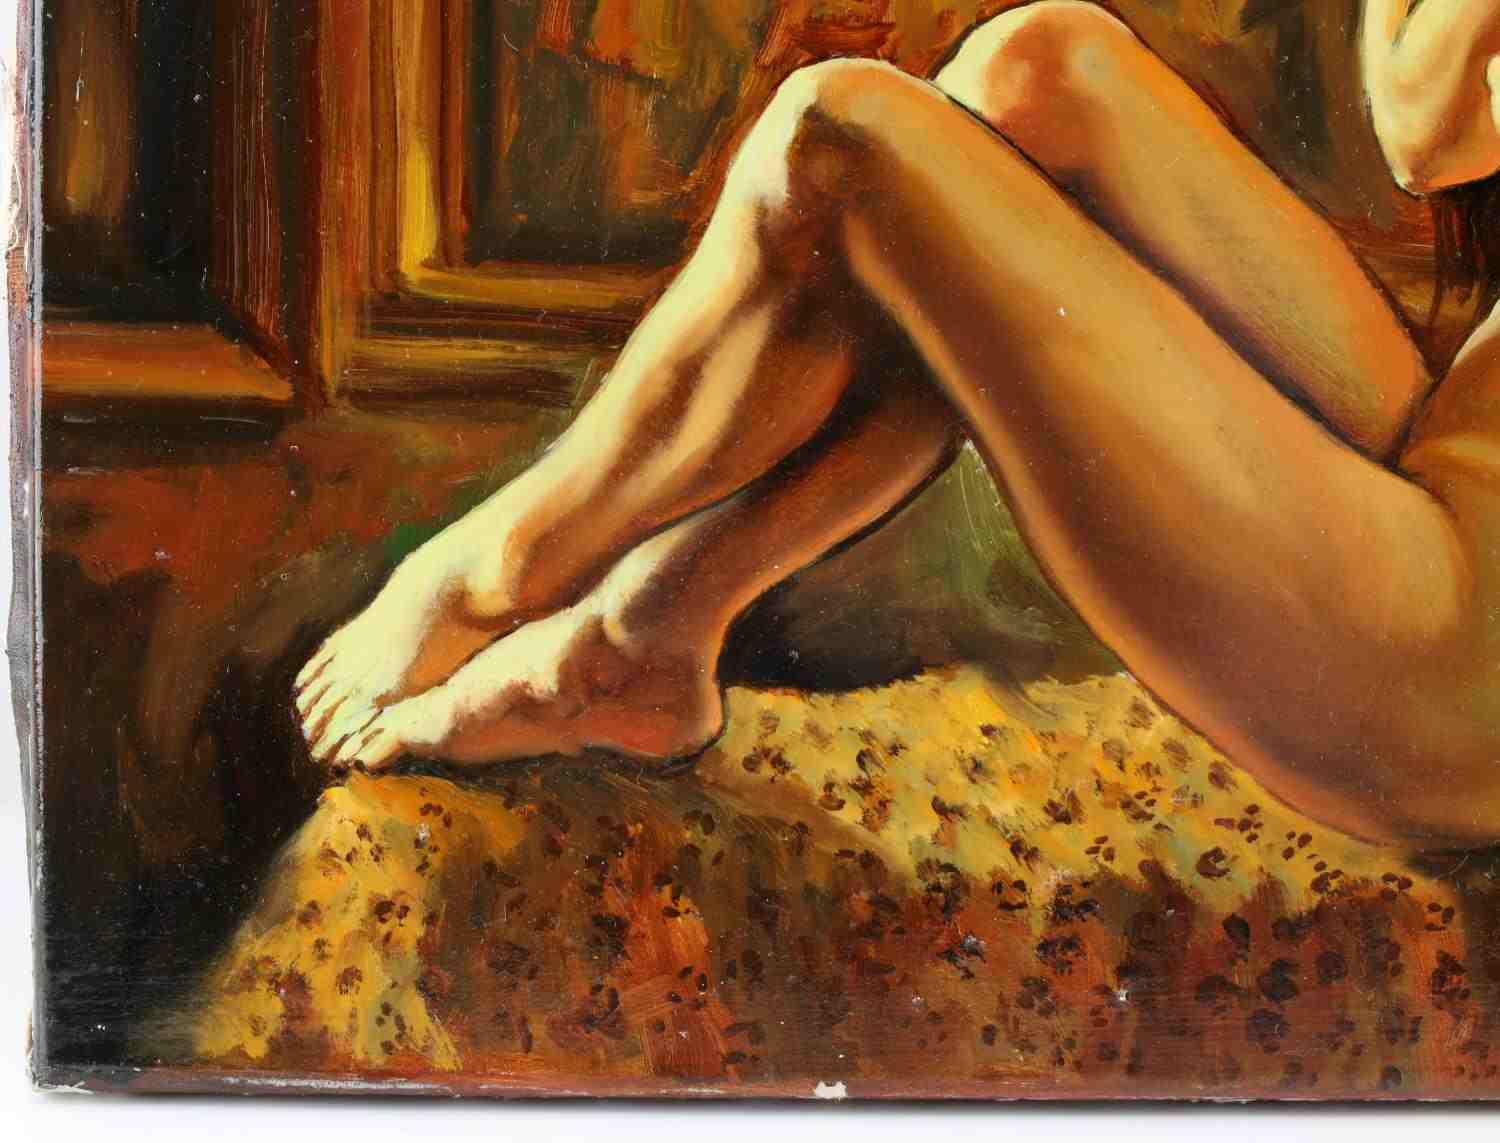 UNFRAMED OIL ON CANVAS SITTING NUDE FEMALE CLASSIC